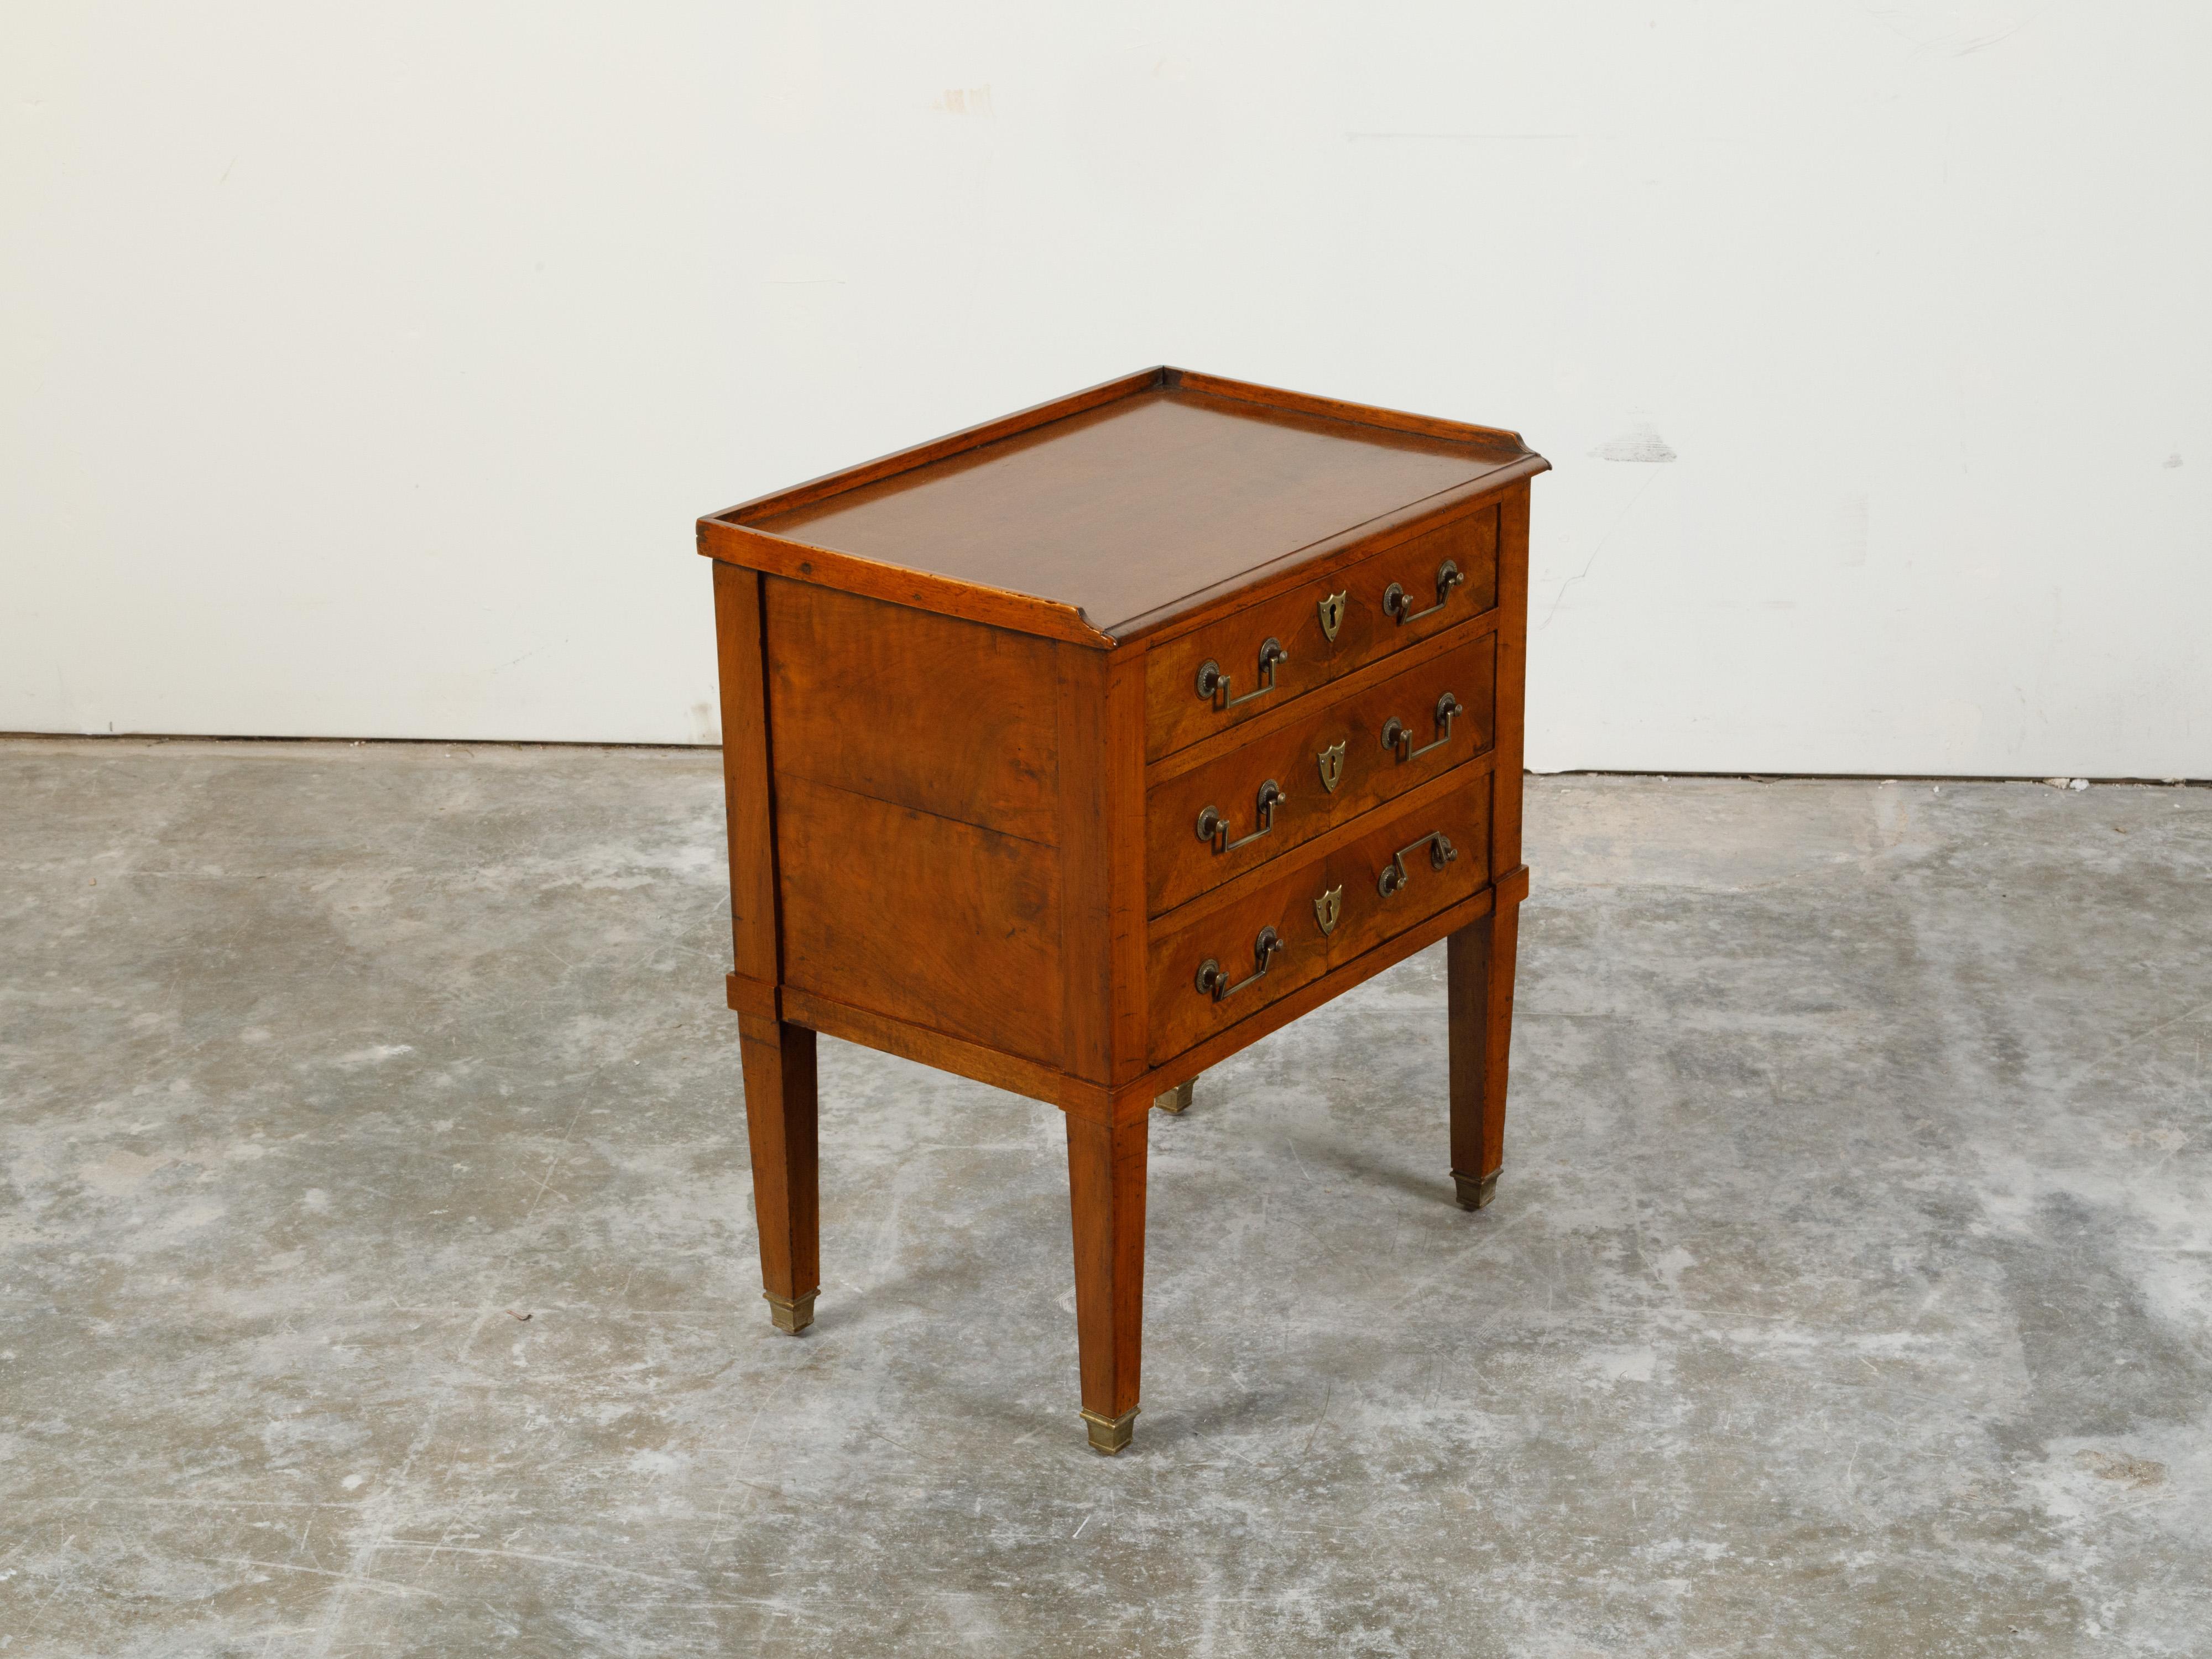 Veneer Petite French 19th Century Walnut Bedside Table with Three Drawers and Gallery